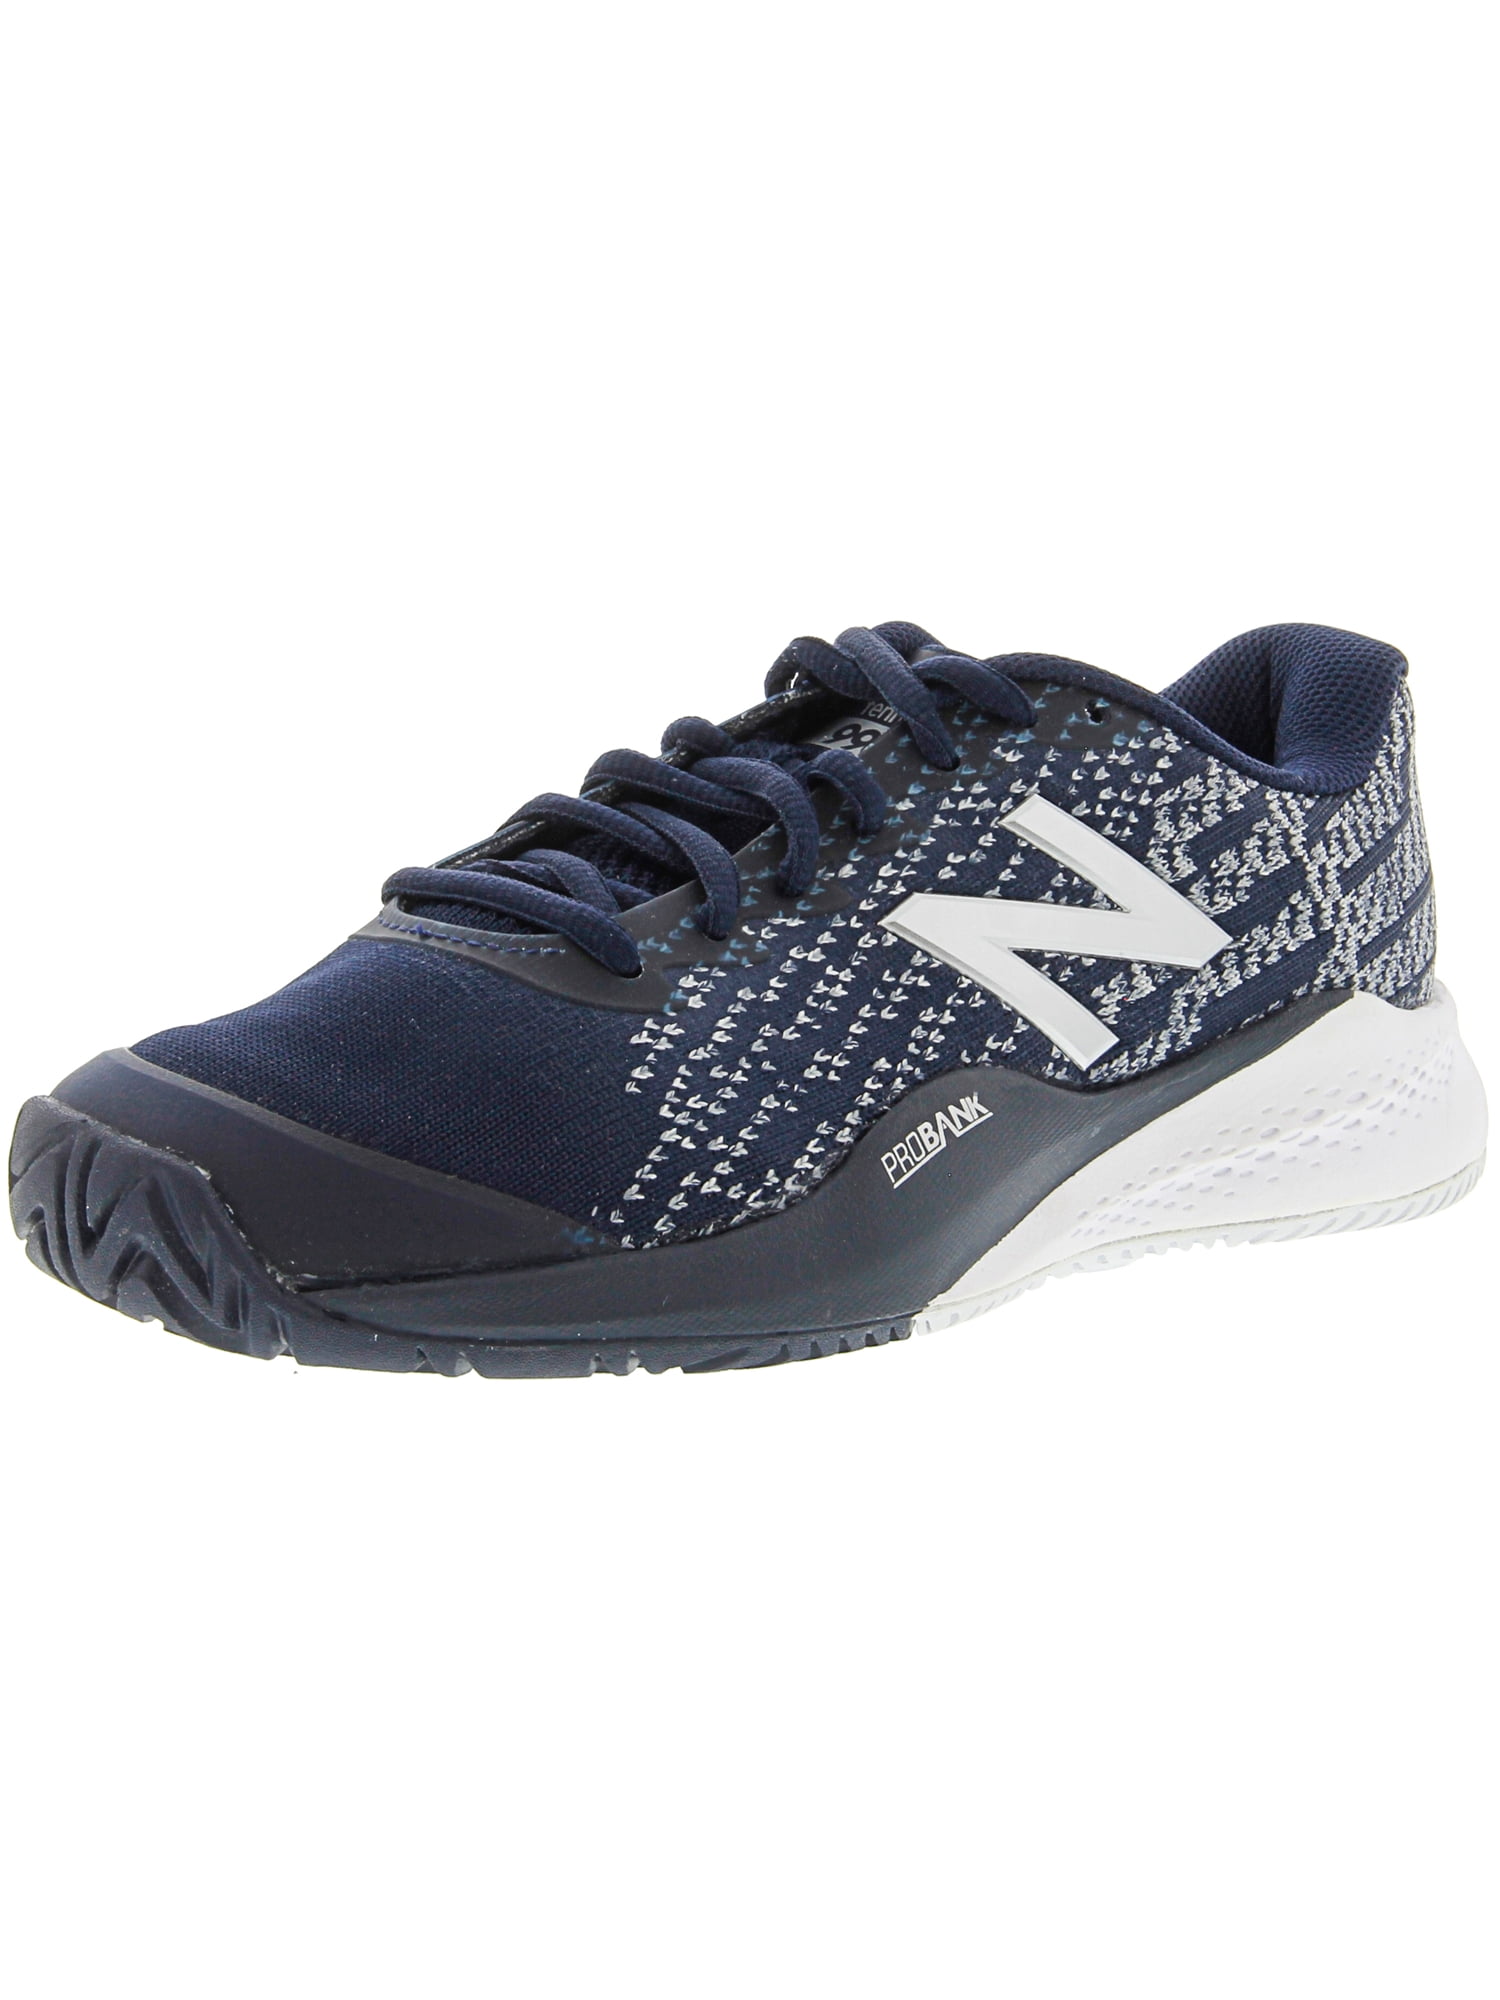 top selling womens tennis shoes